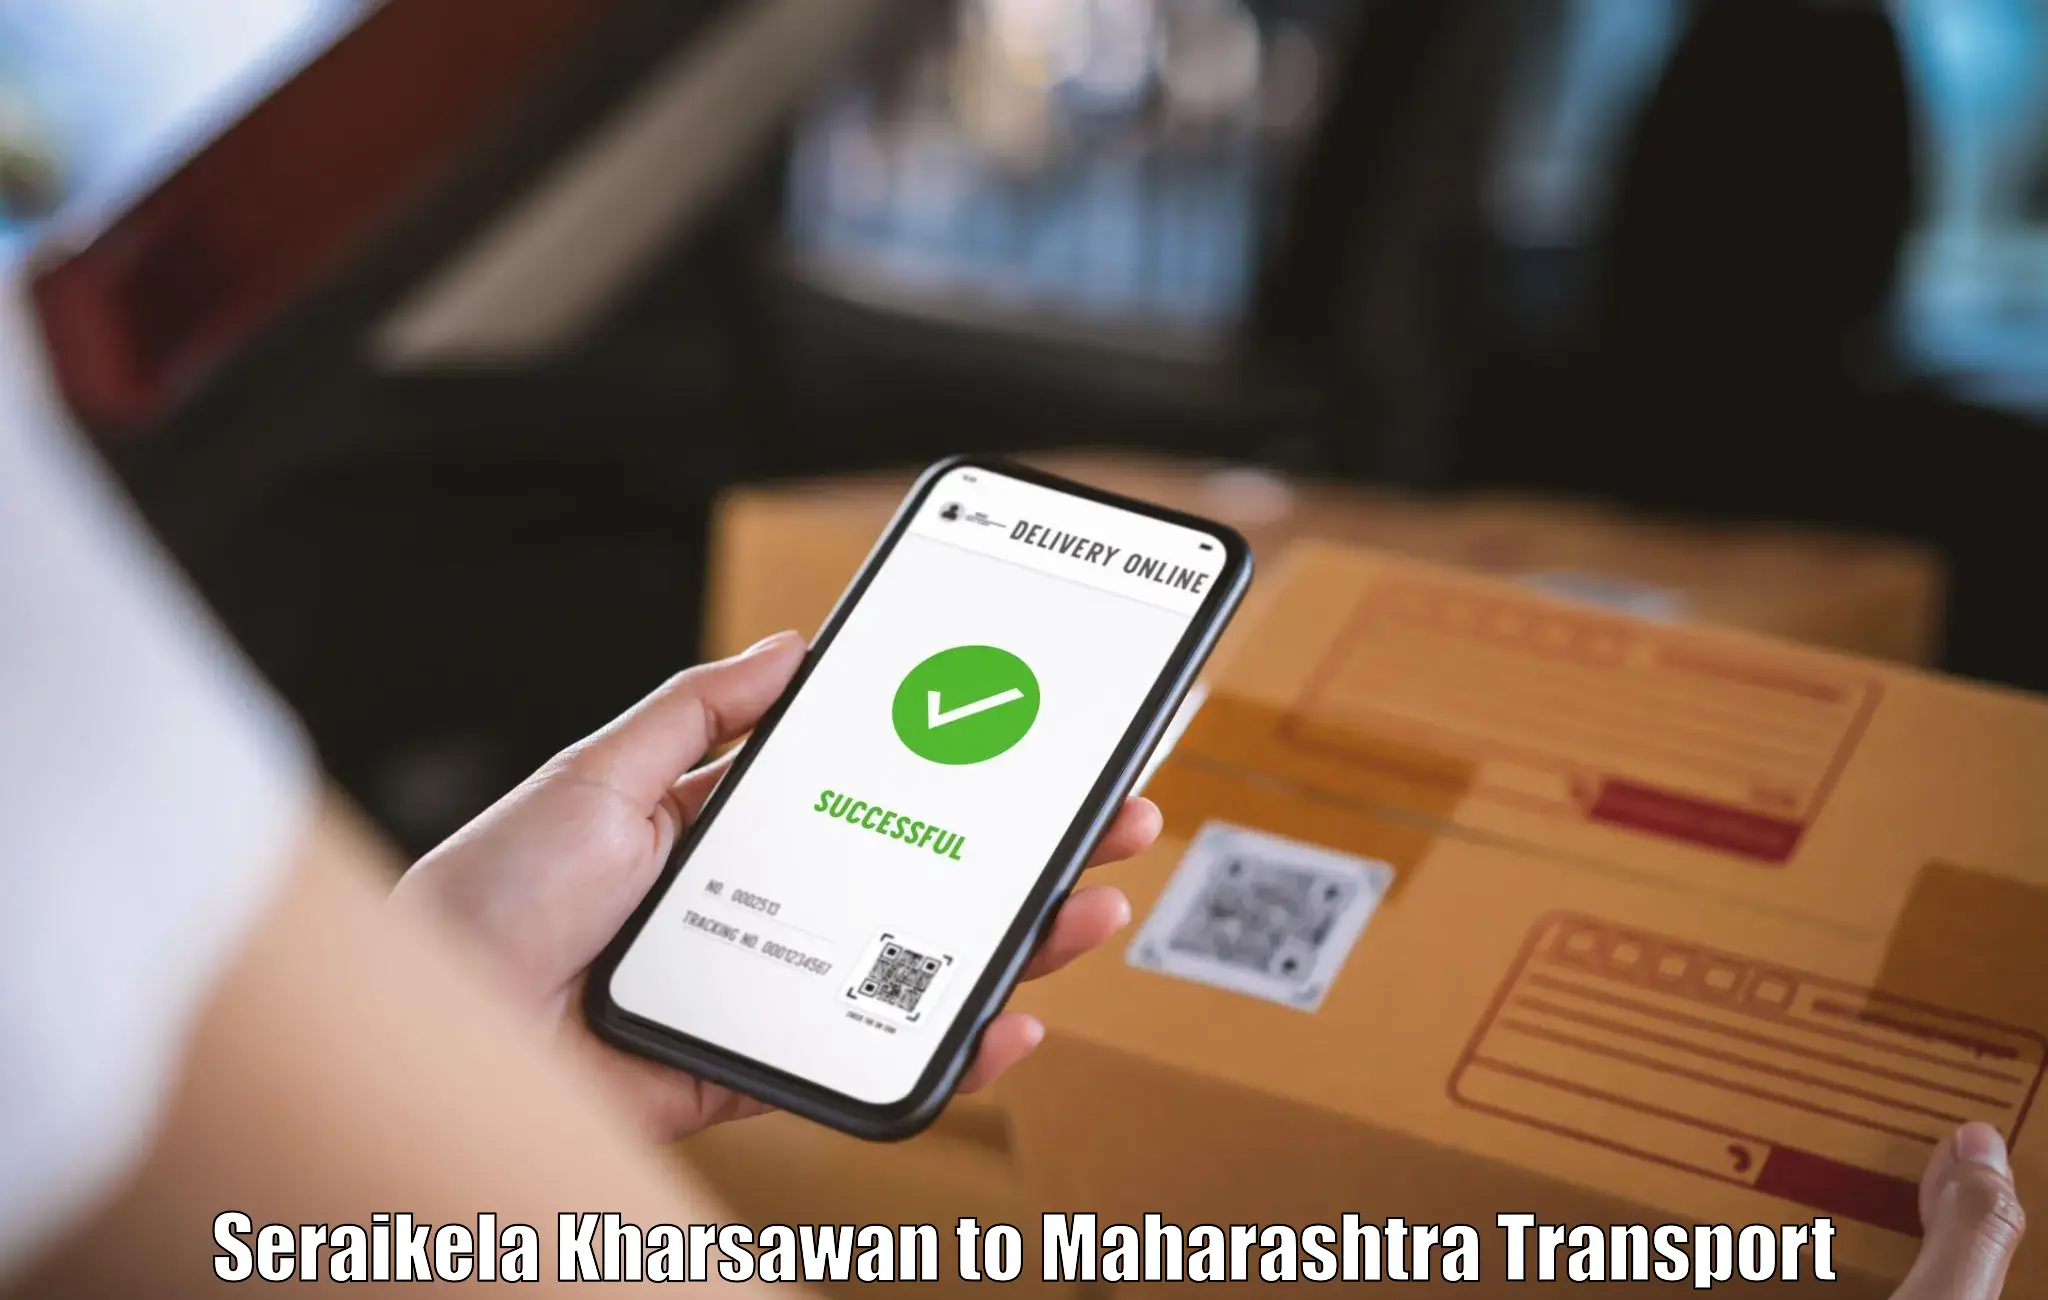 Package delivery services Seraikela Kharsawan to Jaysingpur